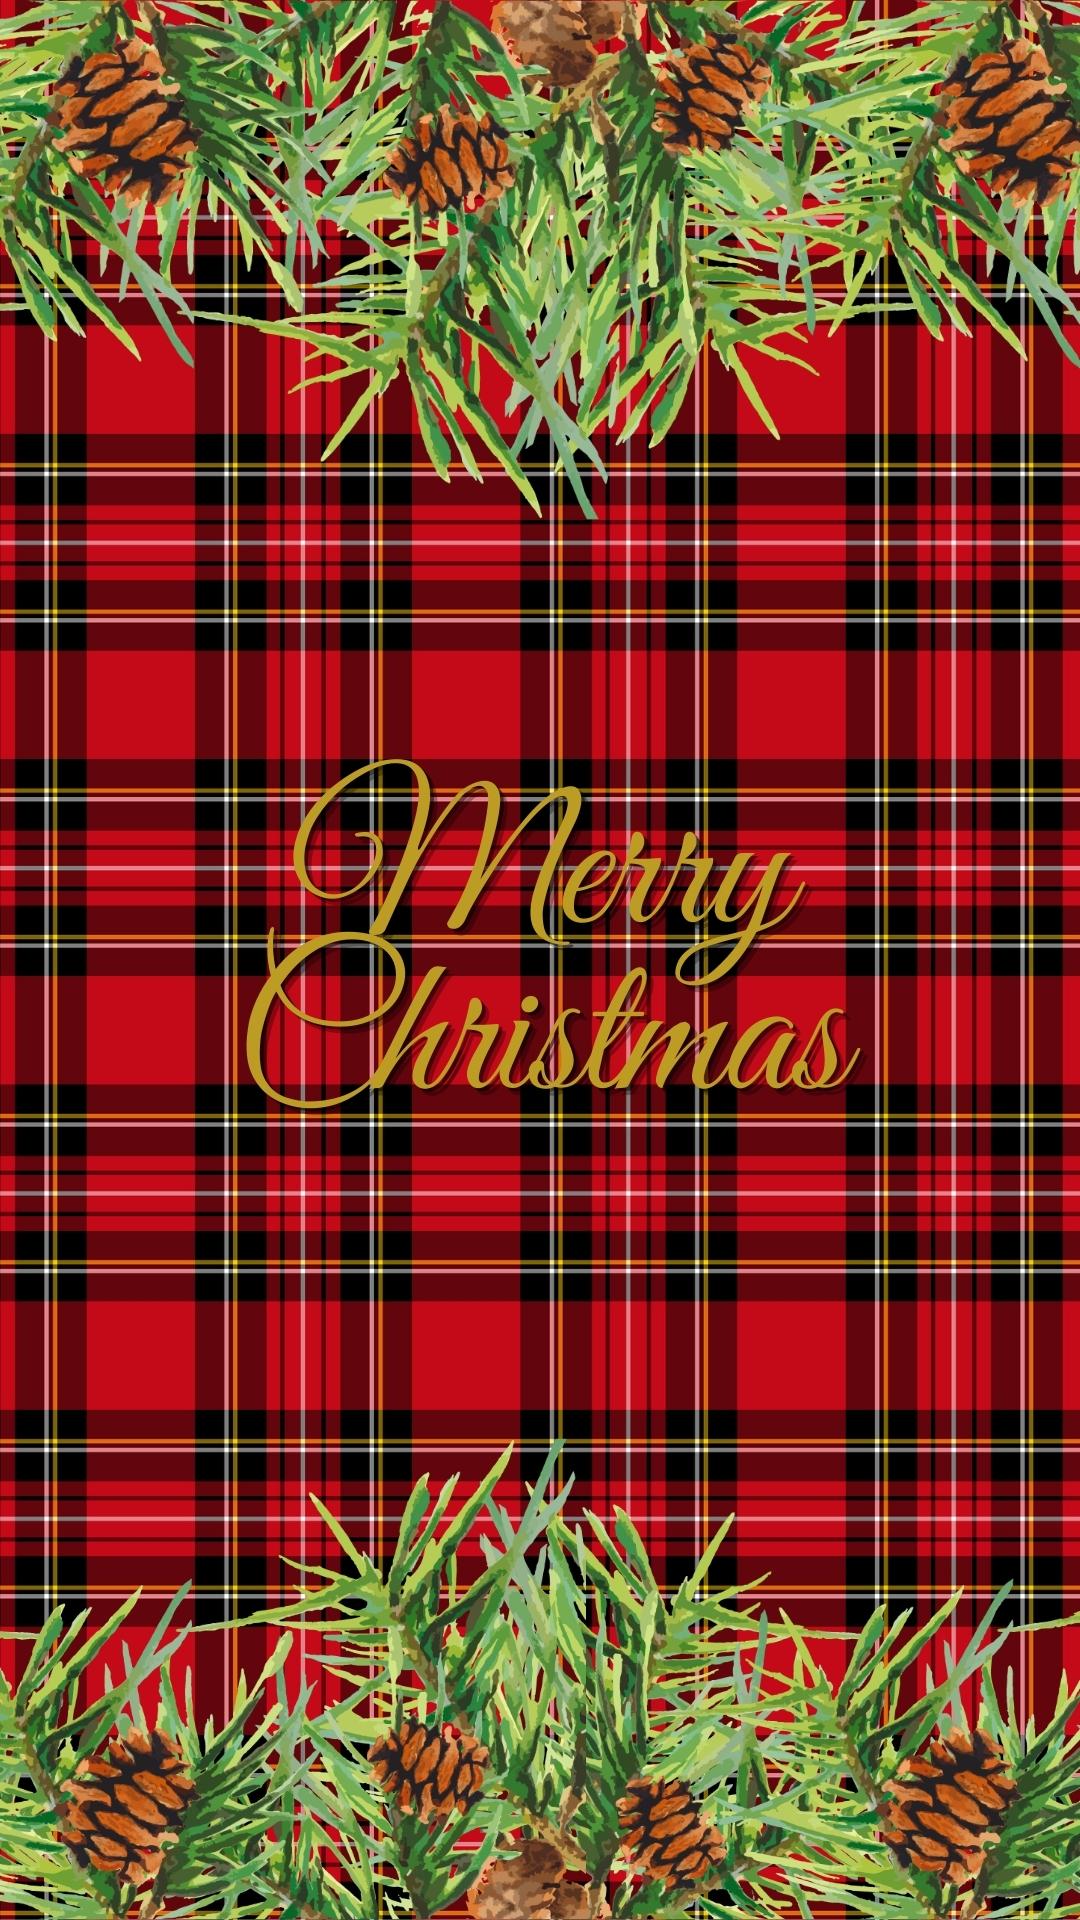 Plaid phone wallpaper background with Merry Christmas written in the middle and pinecones and pine boughs on the top and bottom.